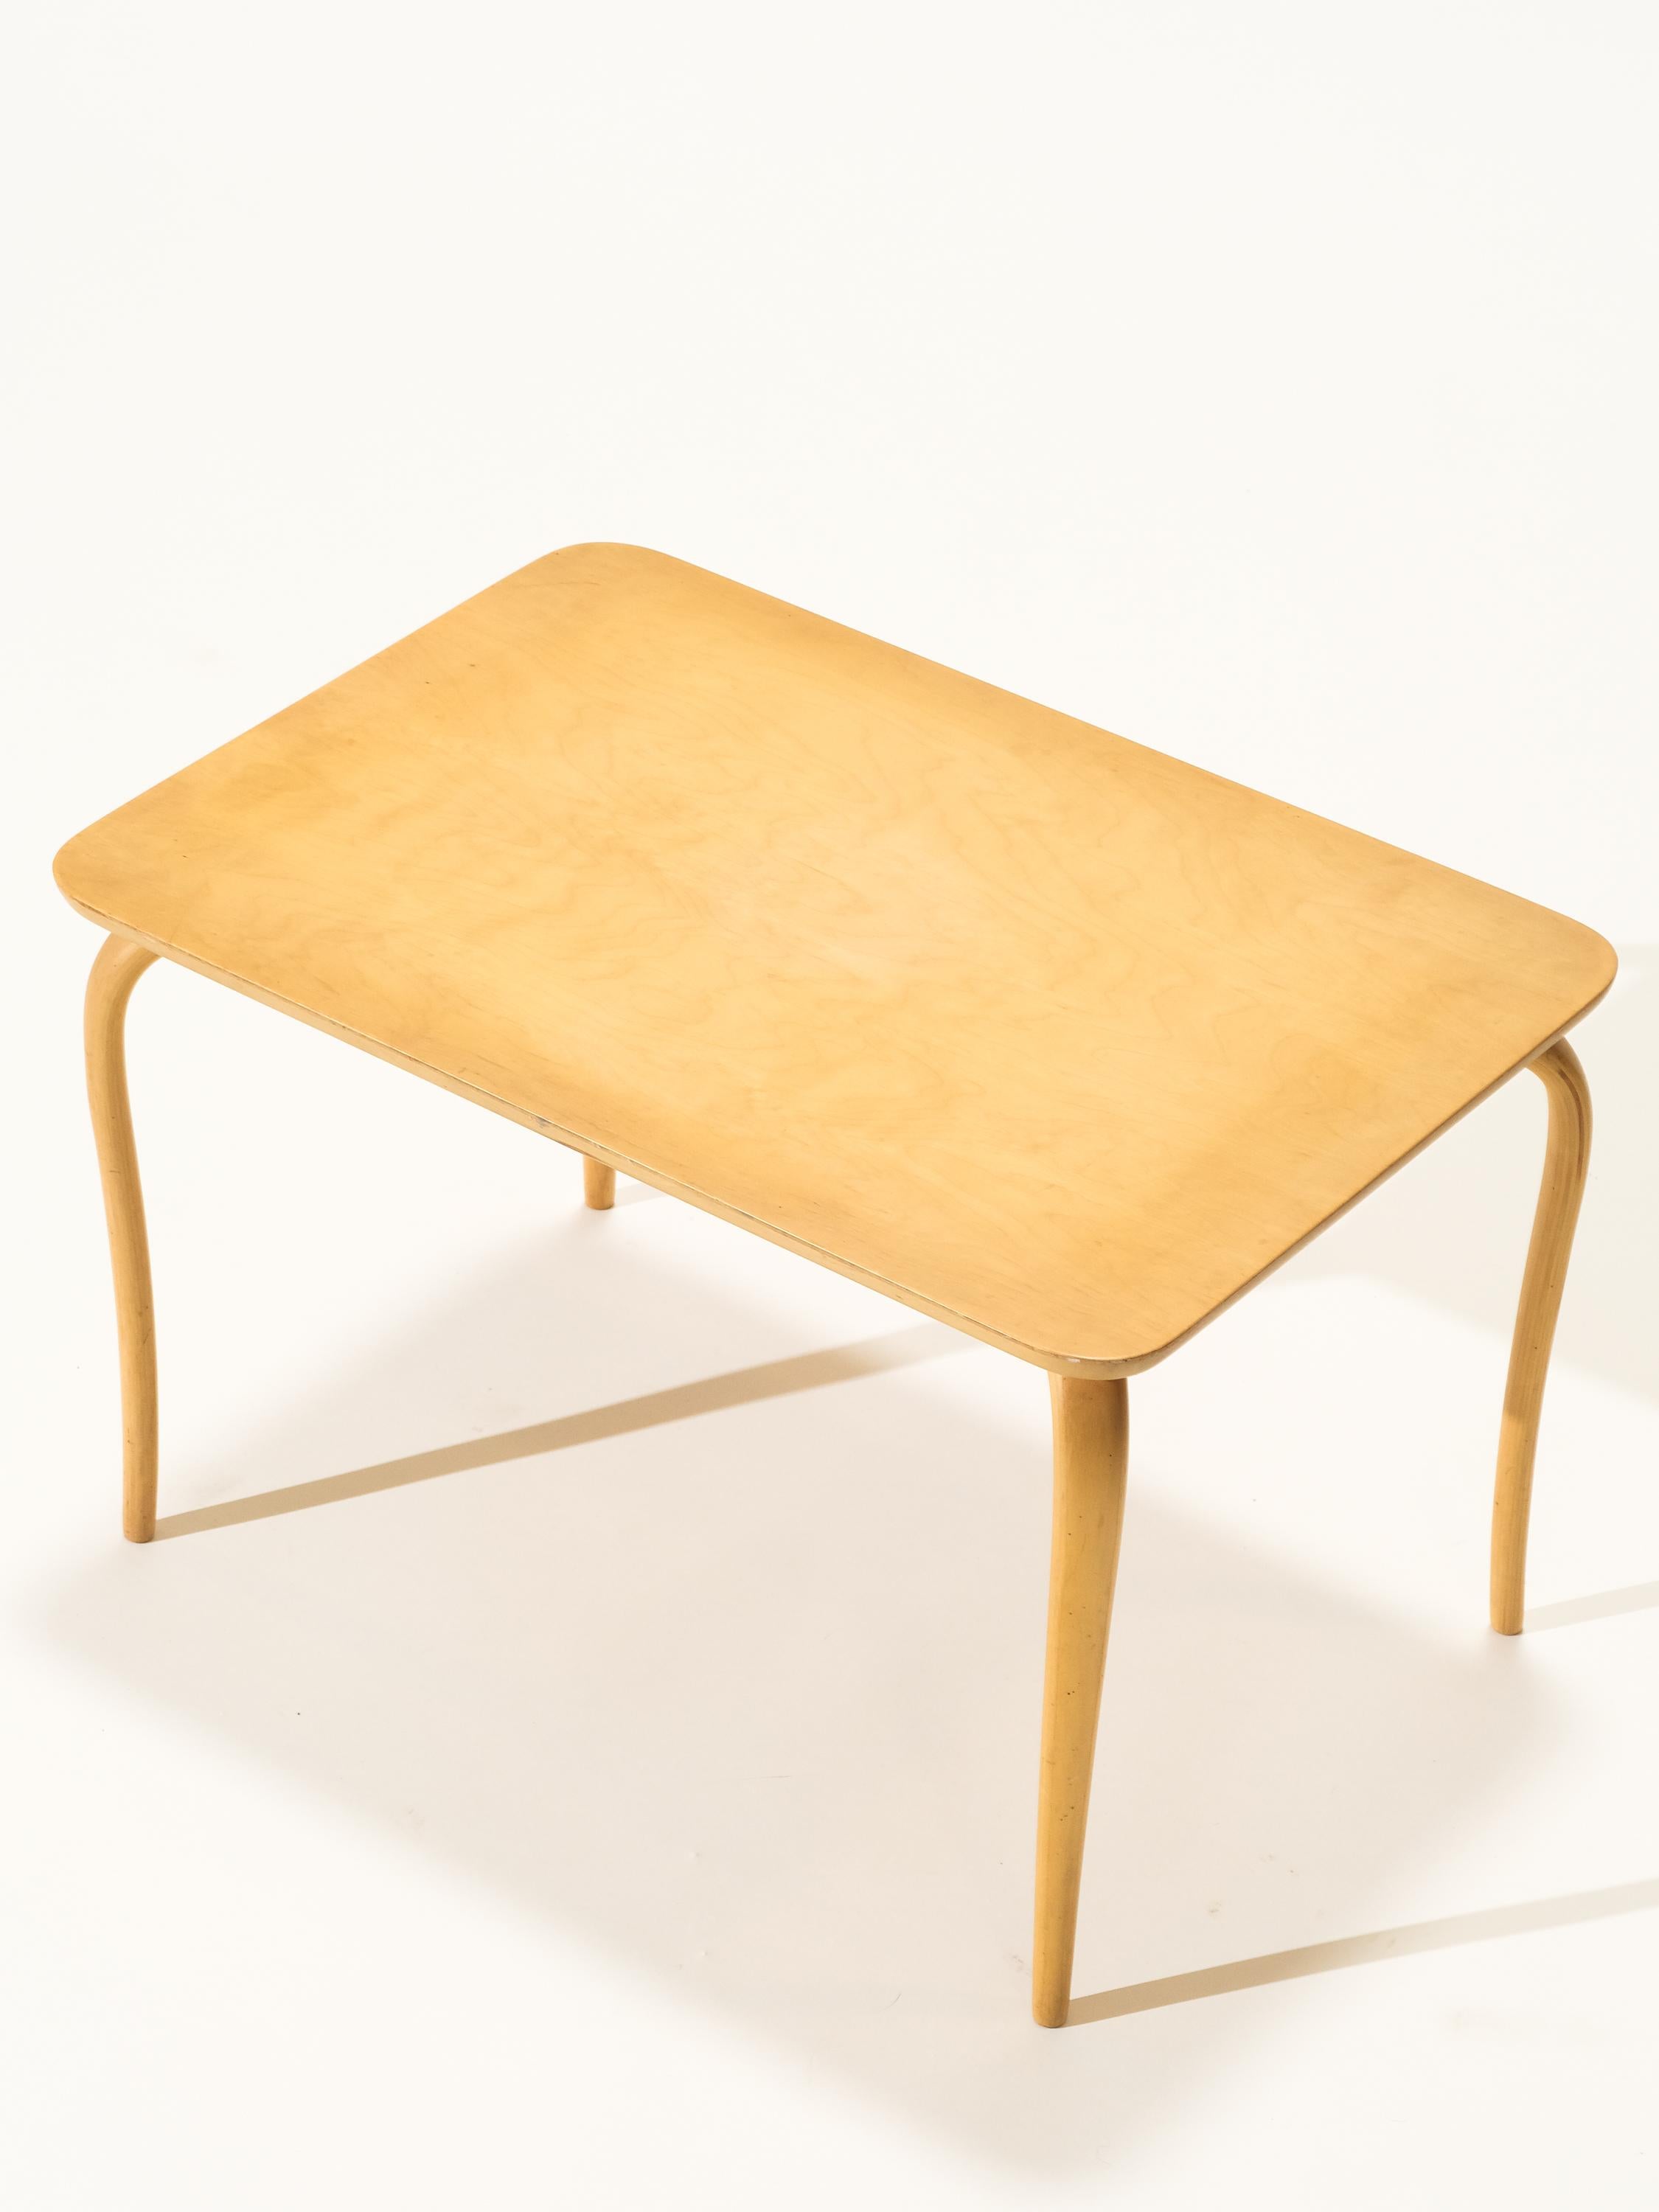 Birch Side Table “Annika” by Bruno Mathsson for Karl Mathsson, Sweden, 1960s In Good Condition For Sale In Helsinki, FI